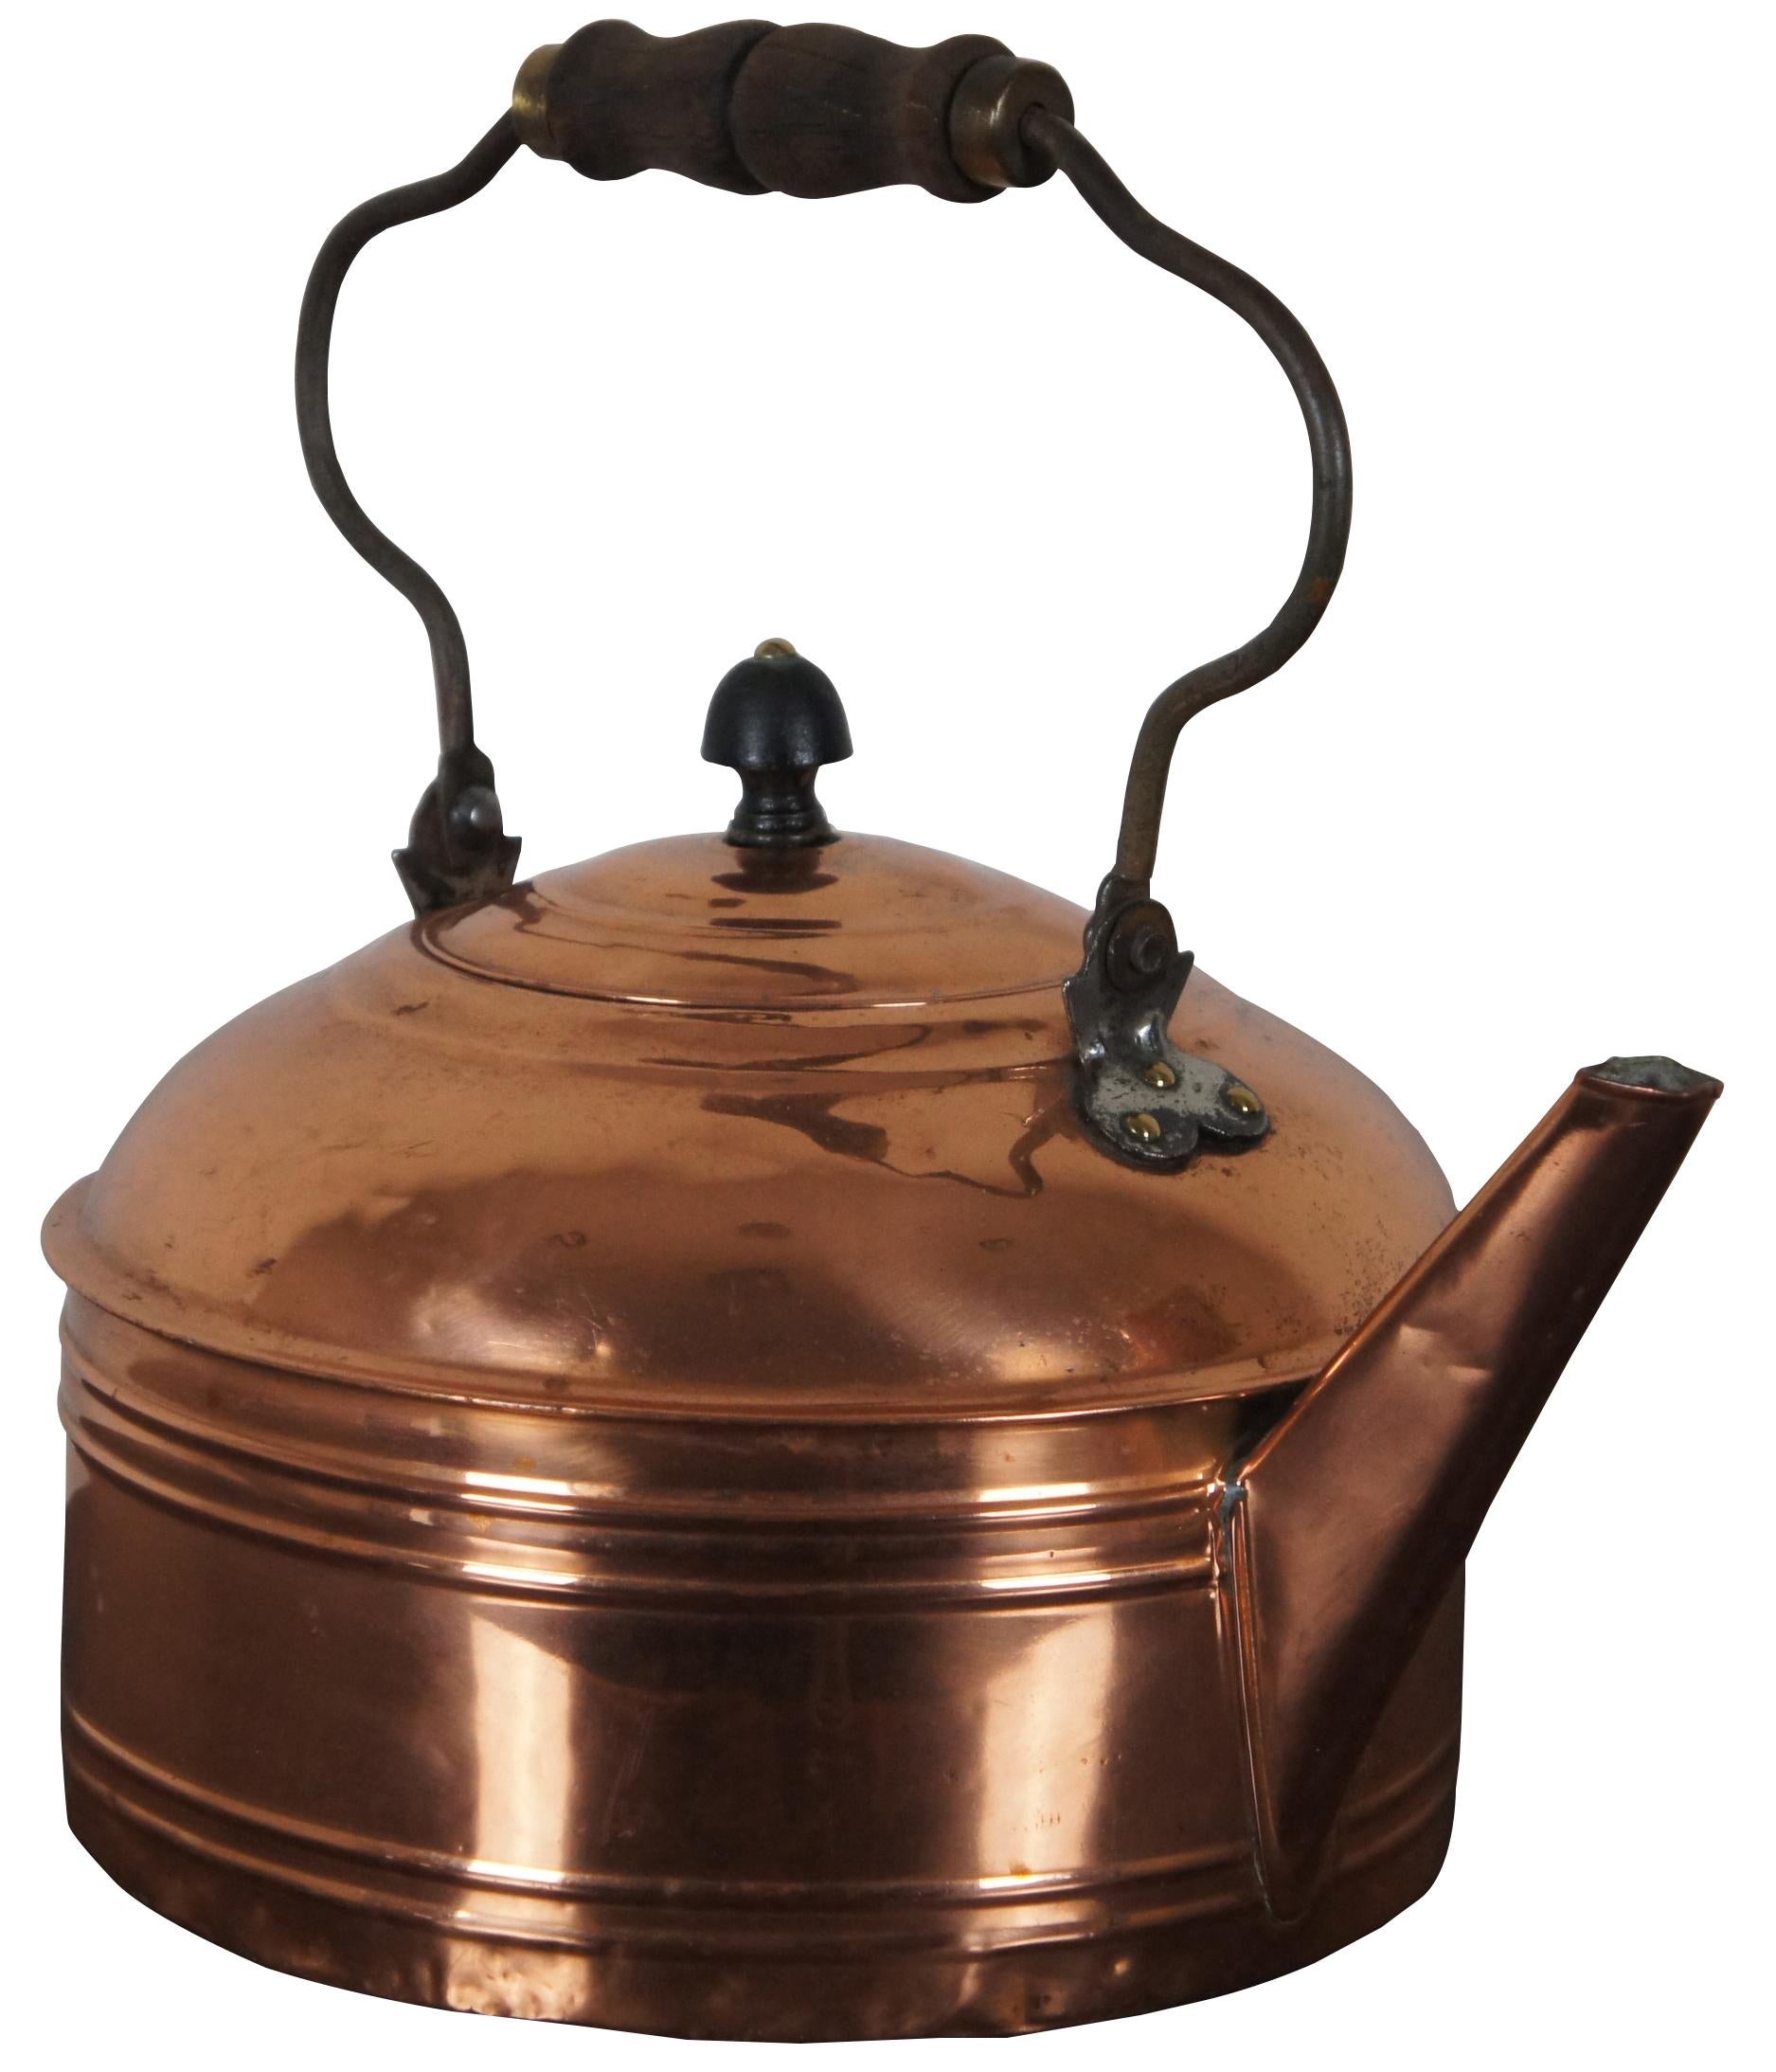 Very shiny antique copper tea kettle with straight spout and wood handle. Measures: 13